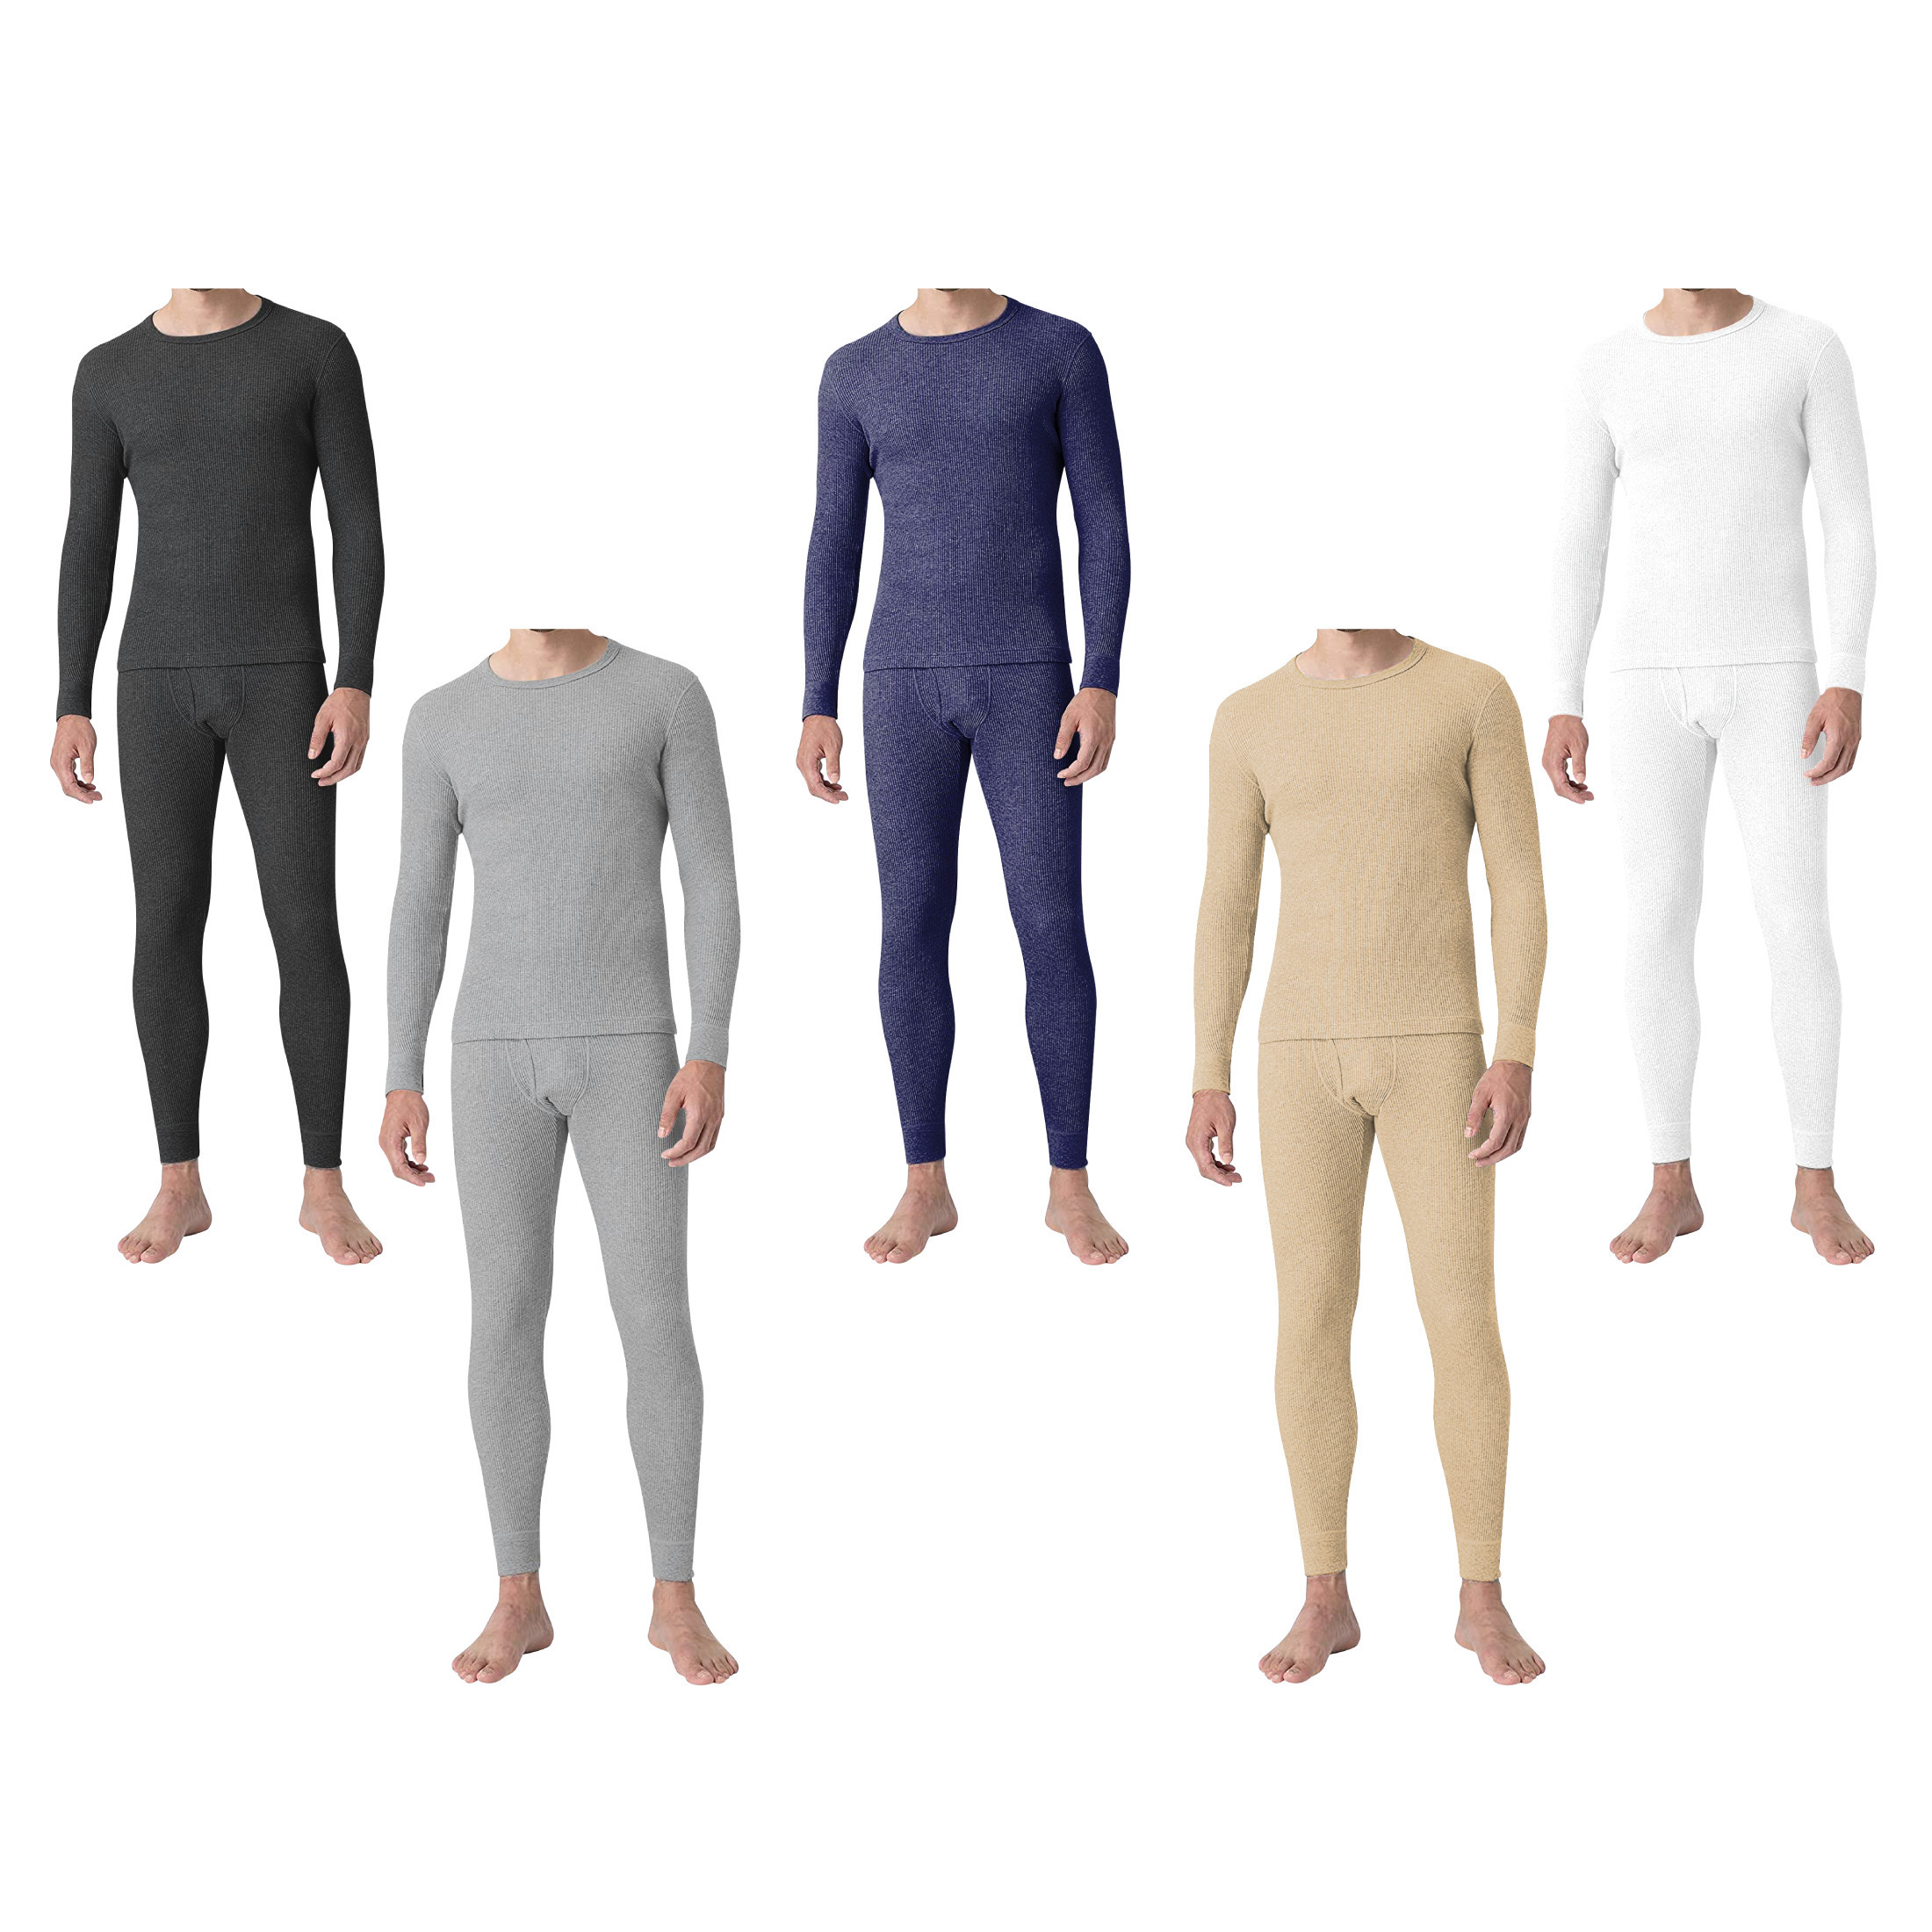 2-Sets: Men's Super Soft Cotton Waffle Knit Winter Thermal Underwear Set - White & Navy, Small